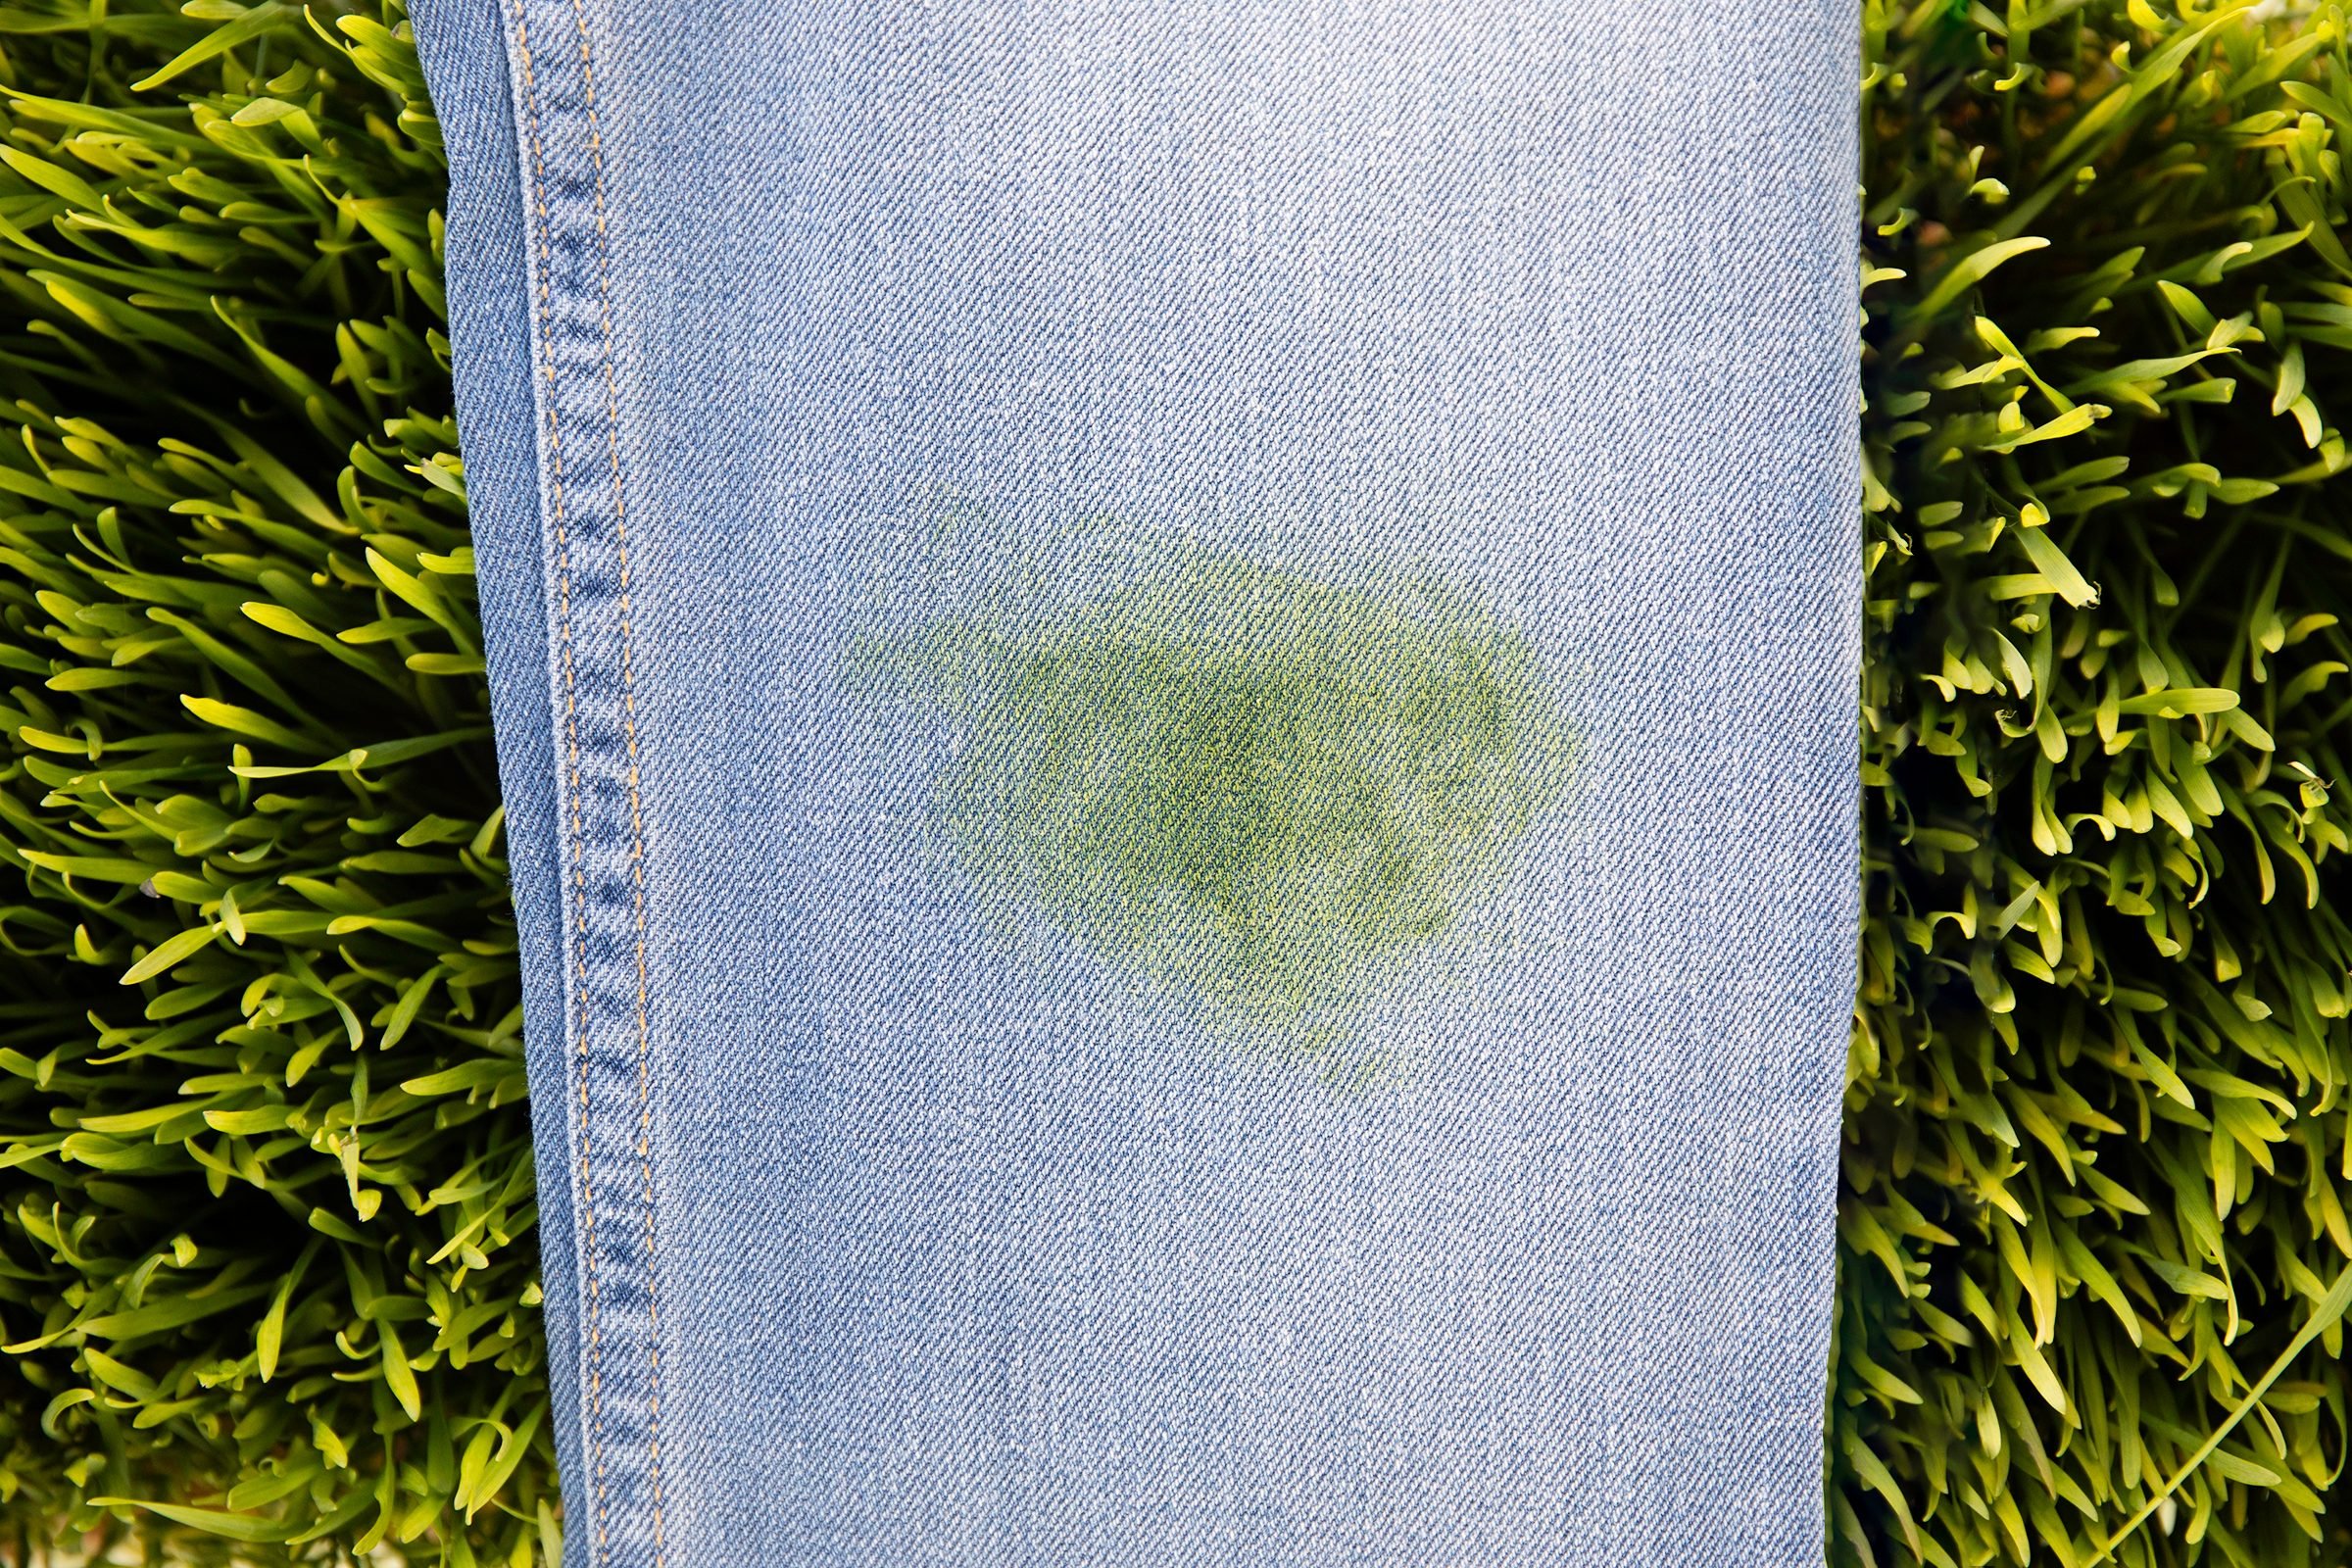 How to Get Out Grass Stains